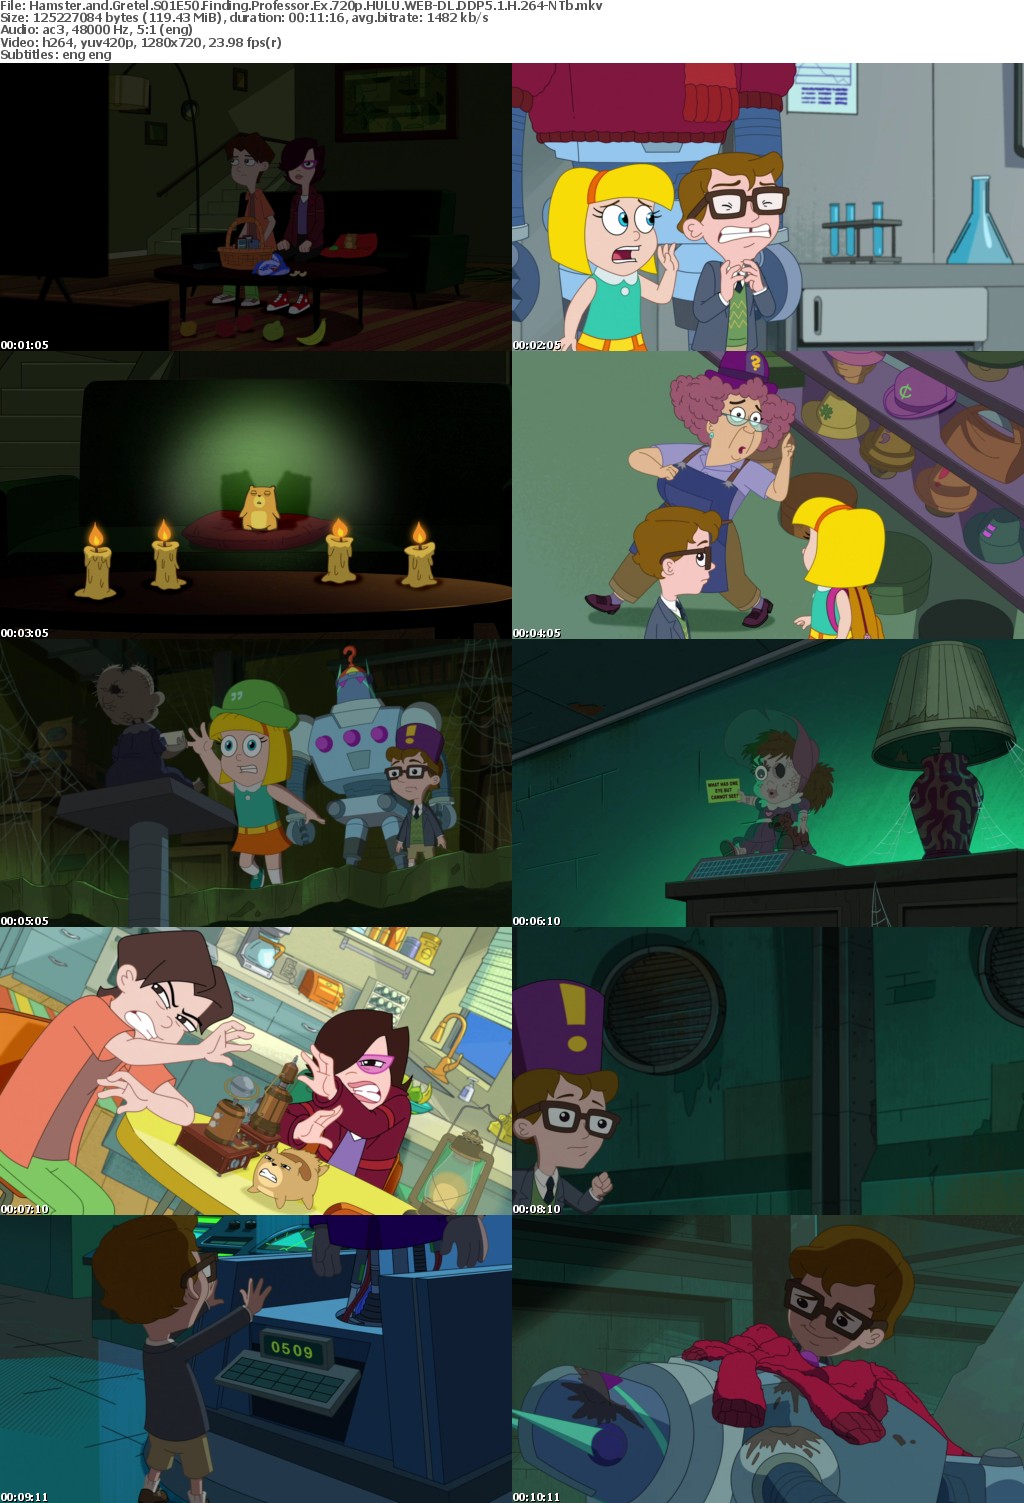 Hamster and Gretel S01E50 Finding Professor Ex 720p HULU WEB-DL DDP5 1 H 264-NTb